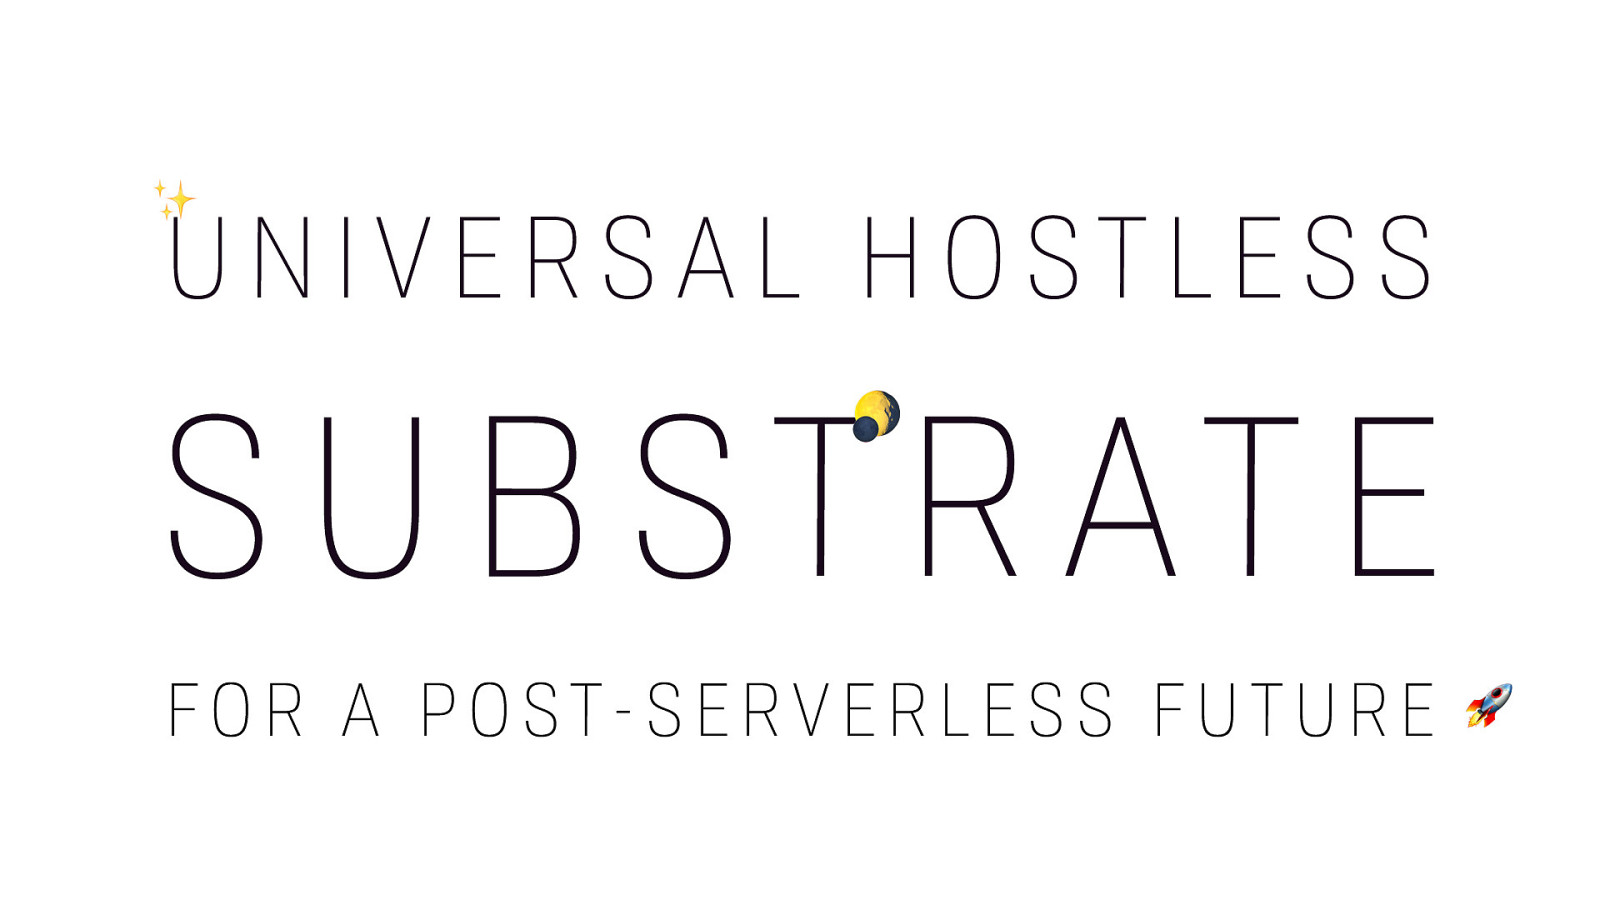 A Universal Hostless Substrate for a Post-Serverless Future